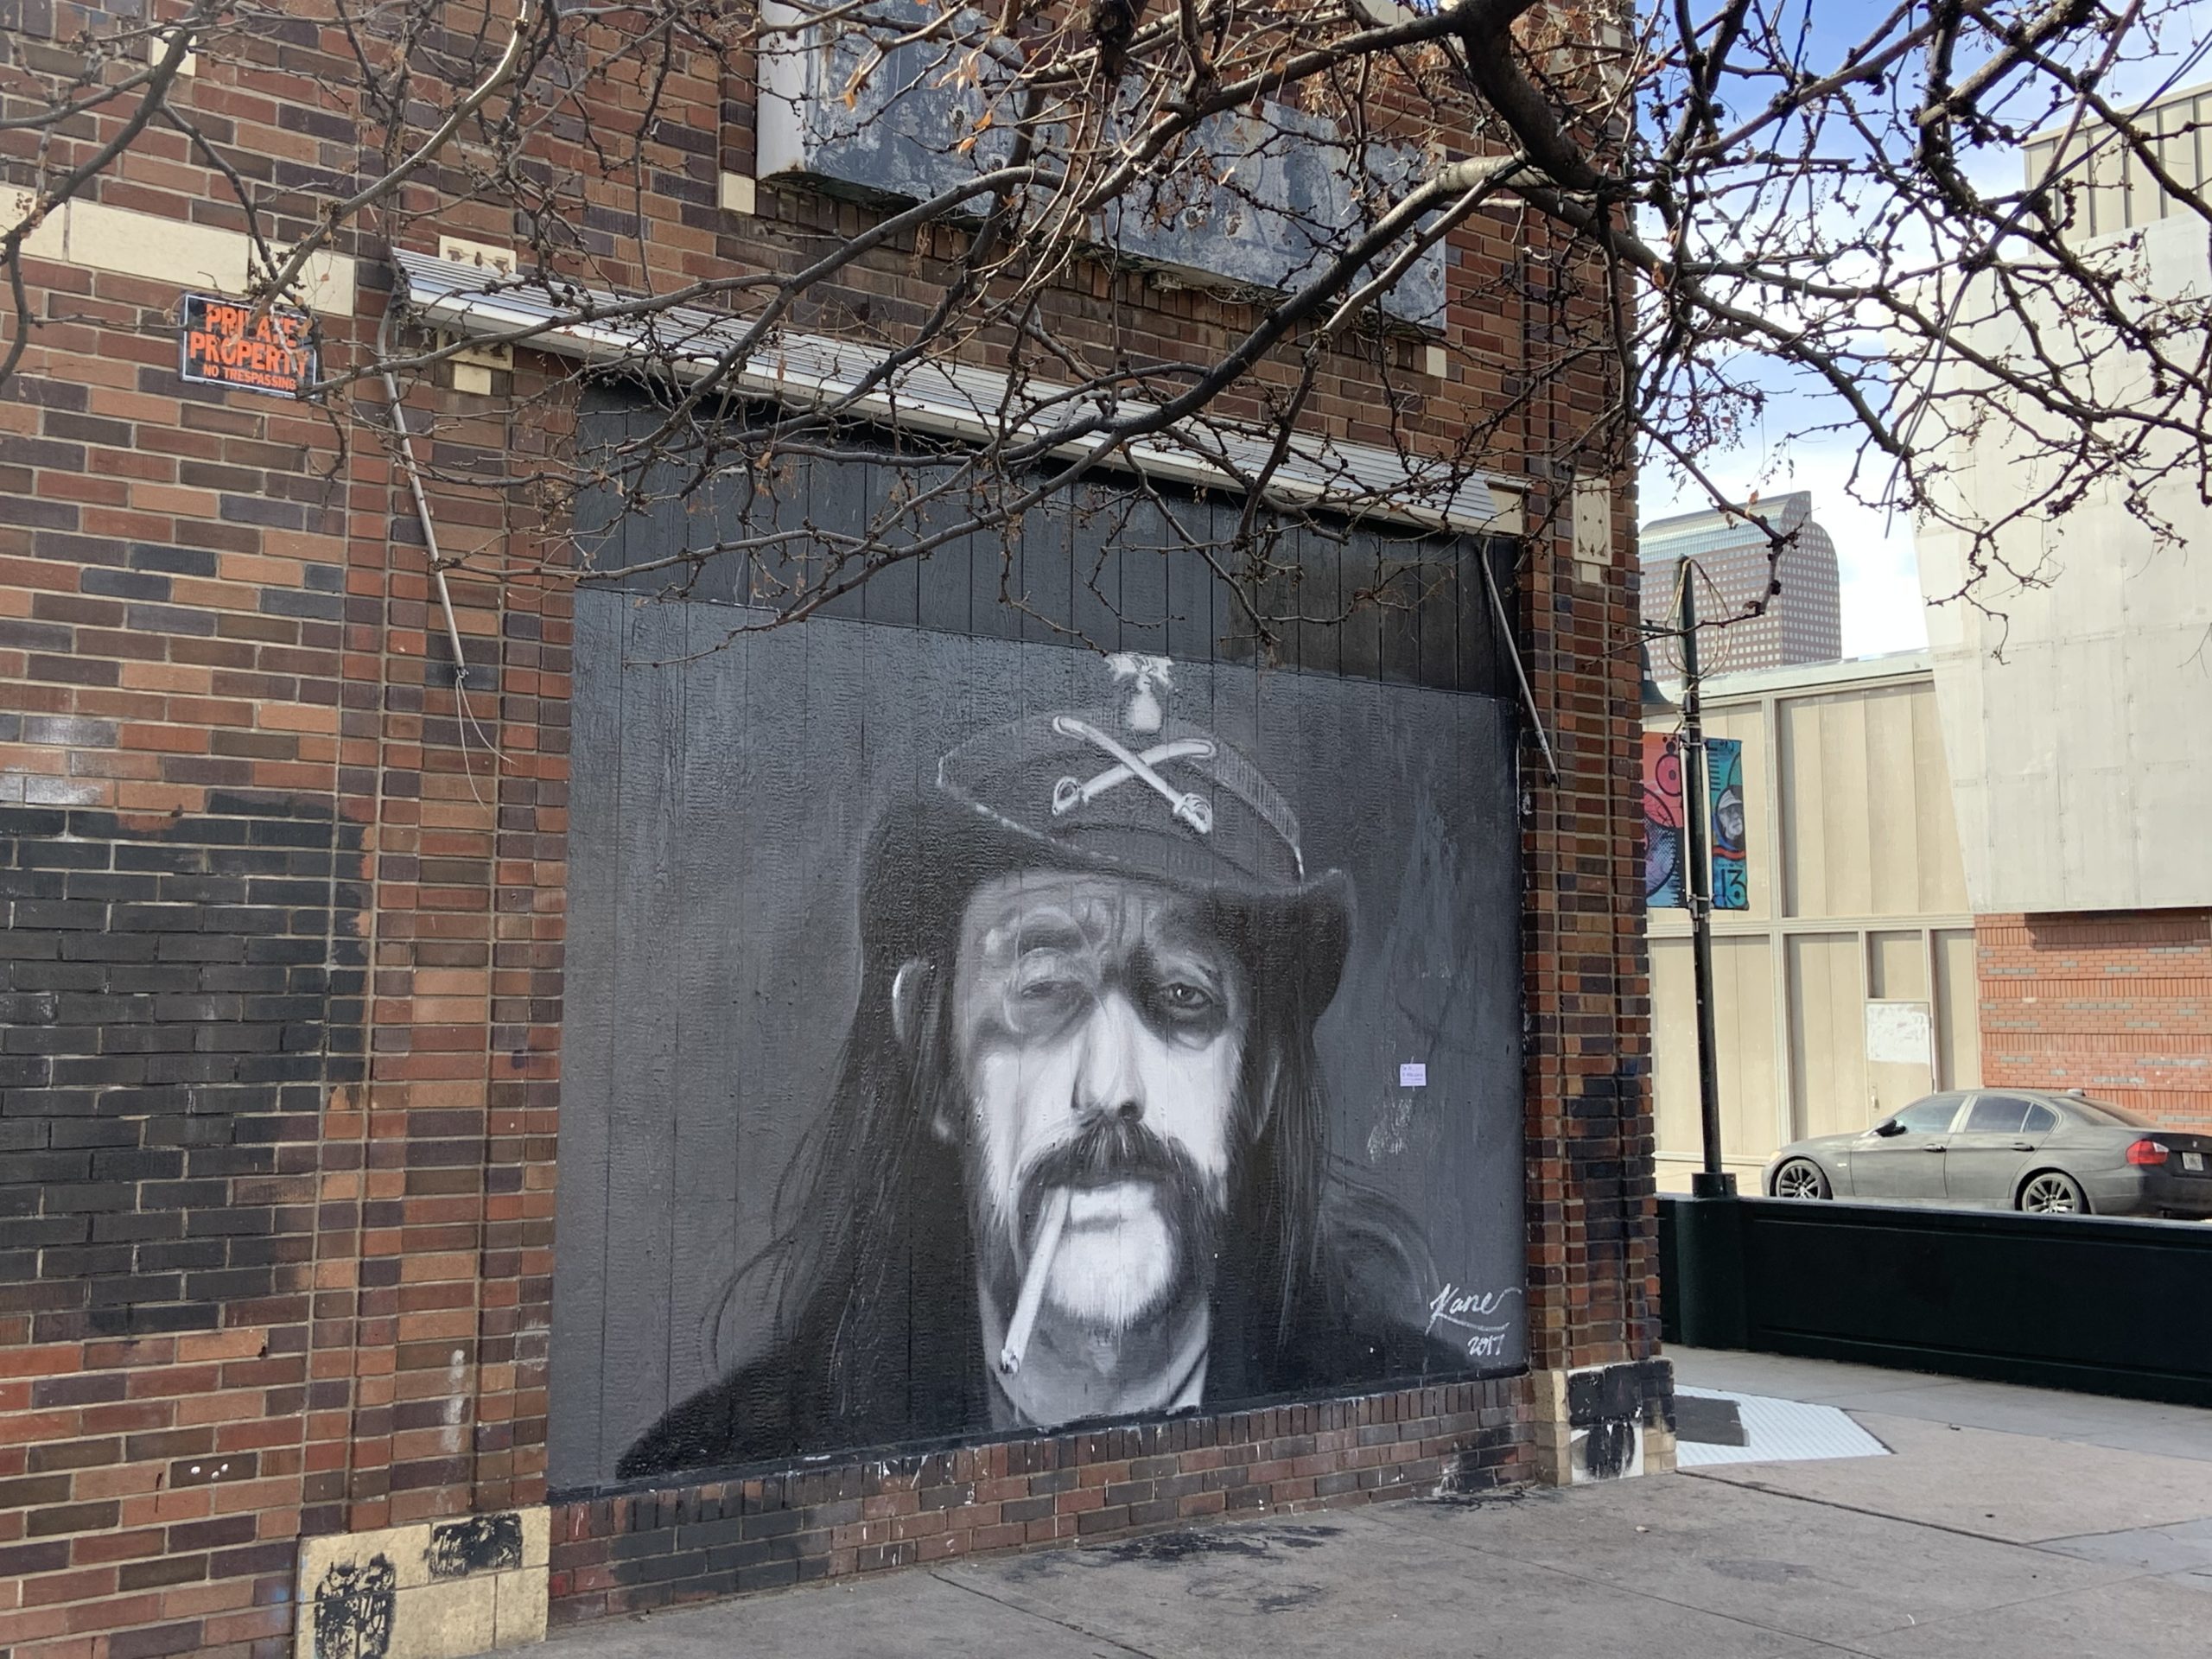 A wall mural of a man, smoking a cigarette, with long hair, mustache, and a cowboy hat.